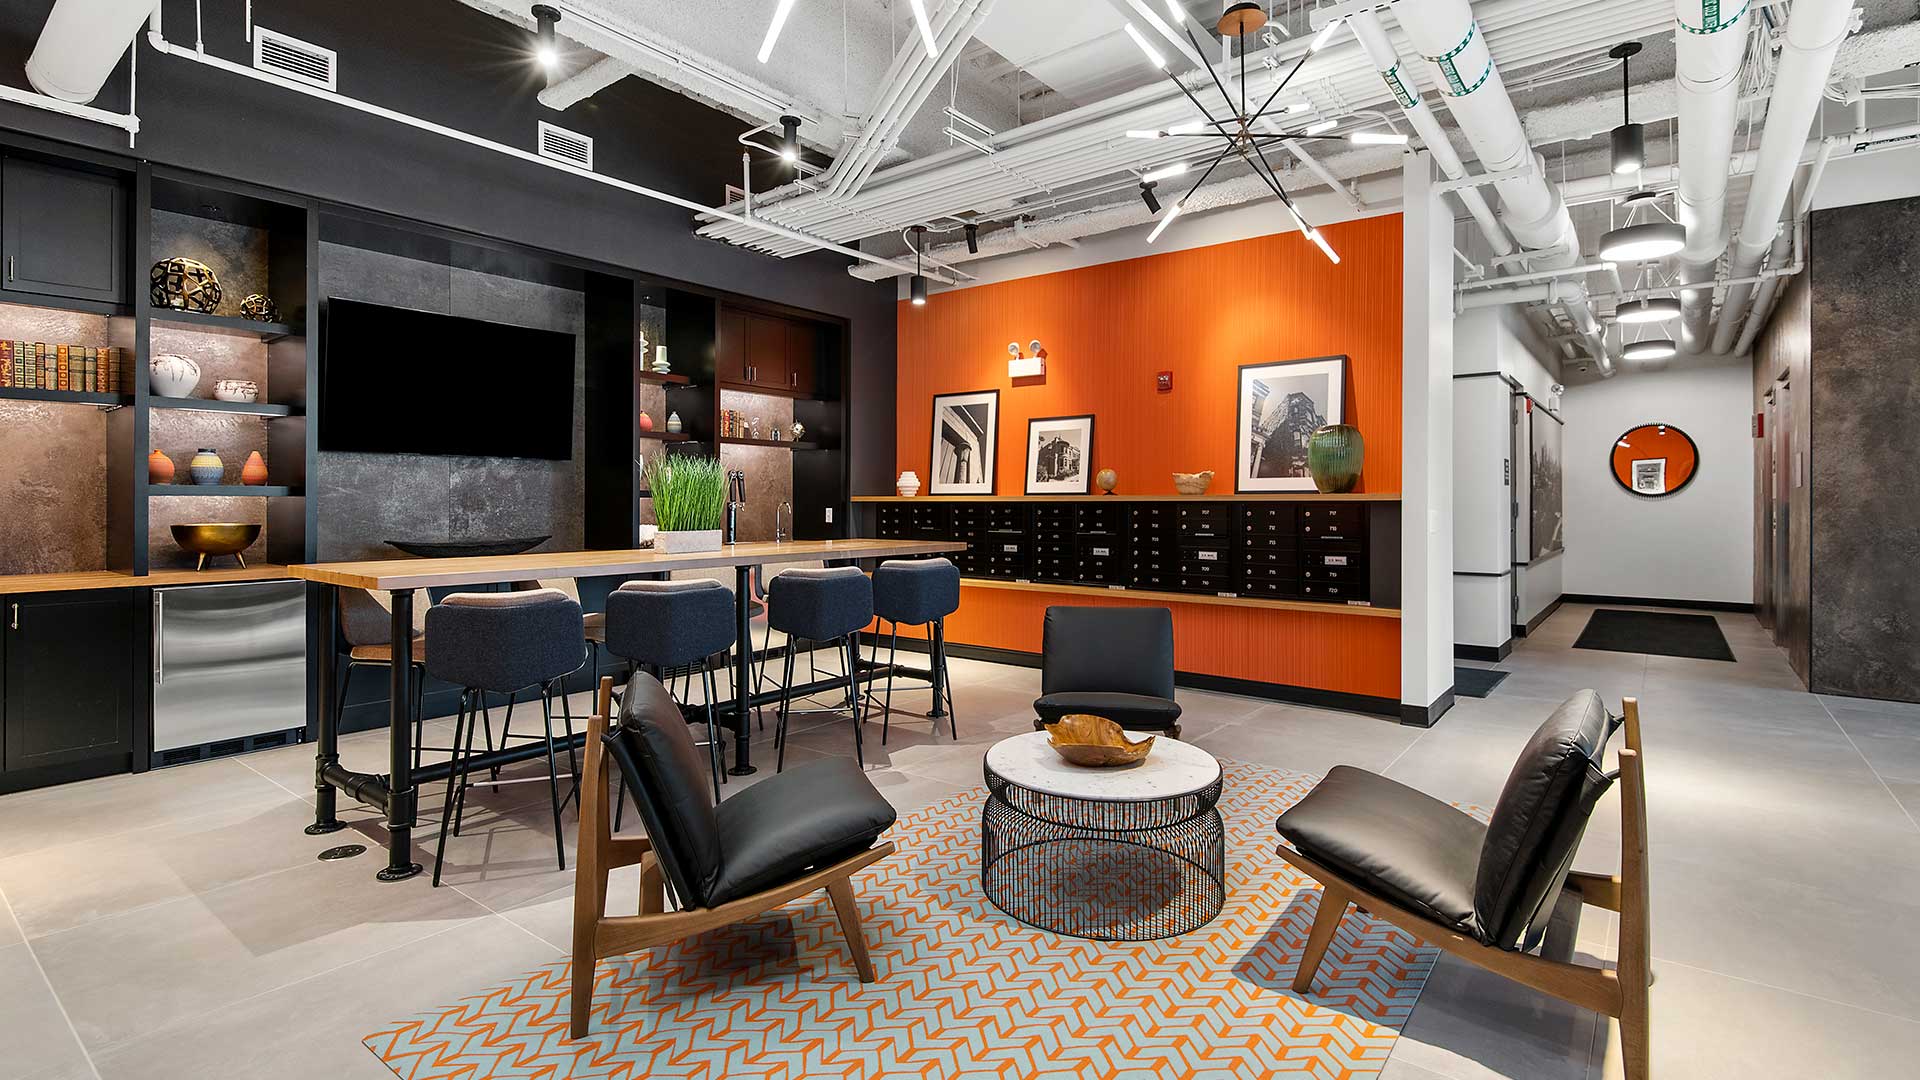 Looking in to the Clubroom room from the lobby at Wrigleyville Lofts. Club chairs are seen ahead with a high-top table off to the left in front of a mounted television. The elevator lobby is seen off to the right.